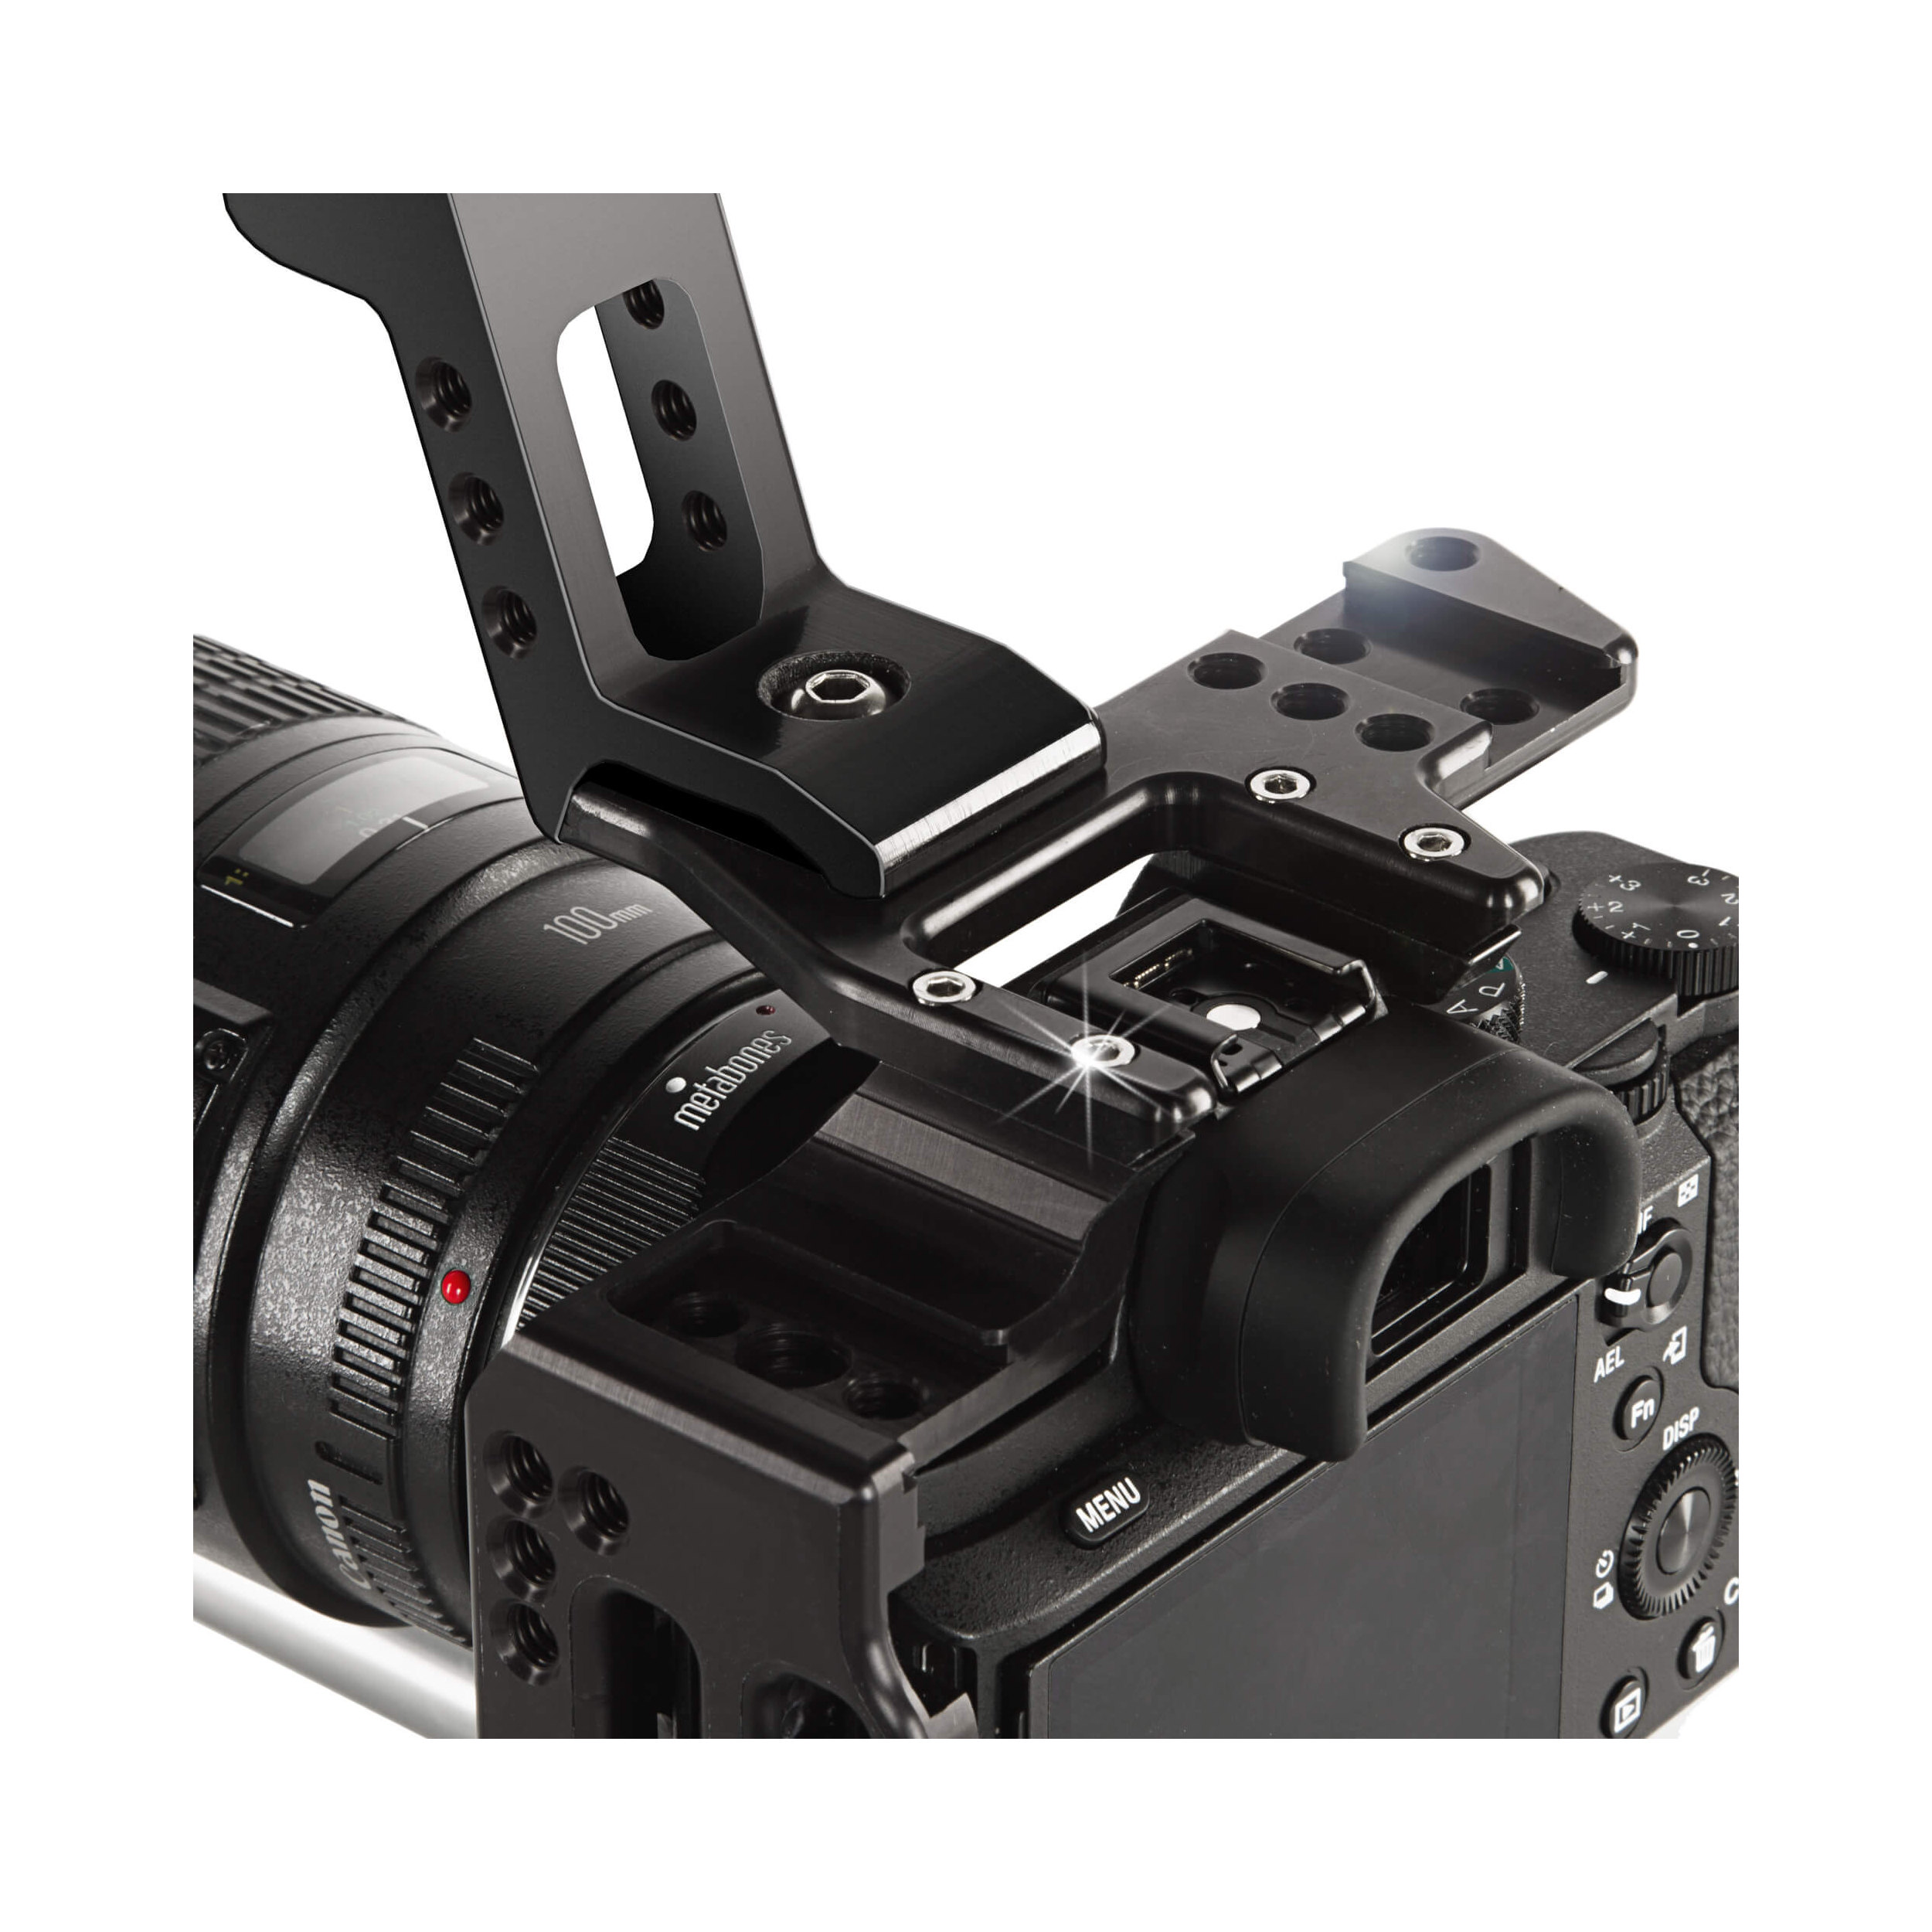 SHAPE Cage with 15mm Rod System for Sony a7 II, a7S II, & a7R II